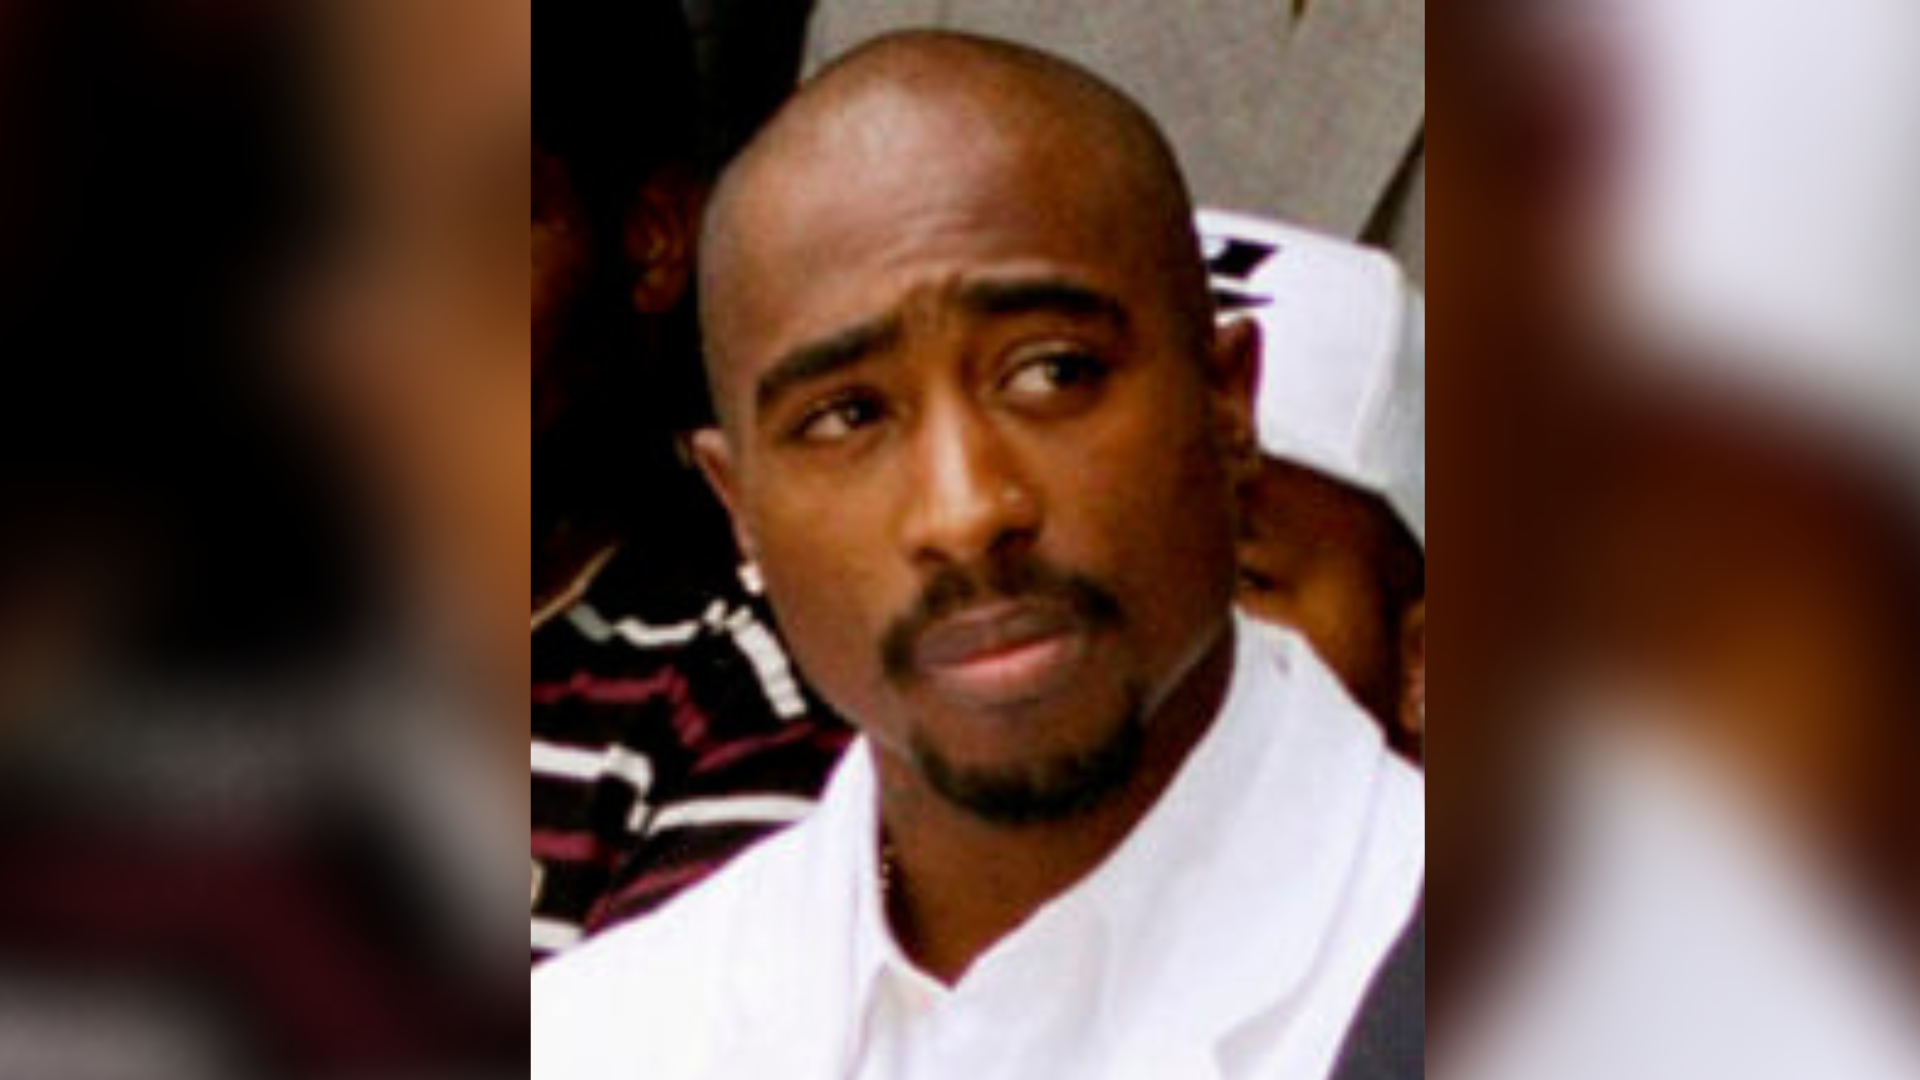 Image of rapper Tupac Shakur at a voter registration event in South Central Los Angeles, Aug. 15, 1...